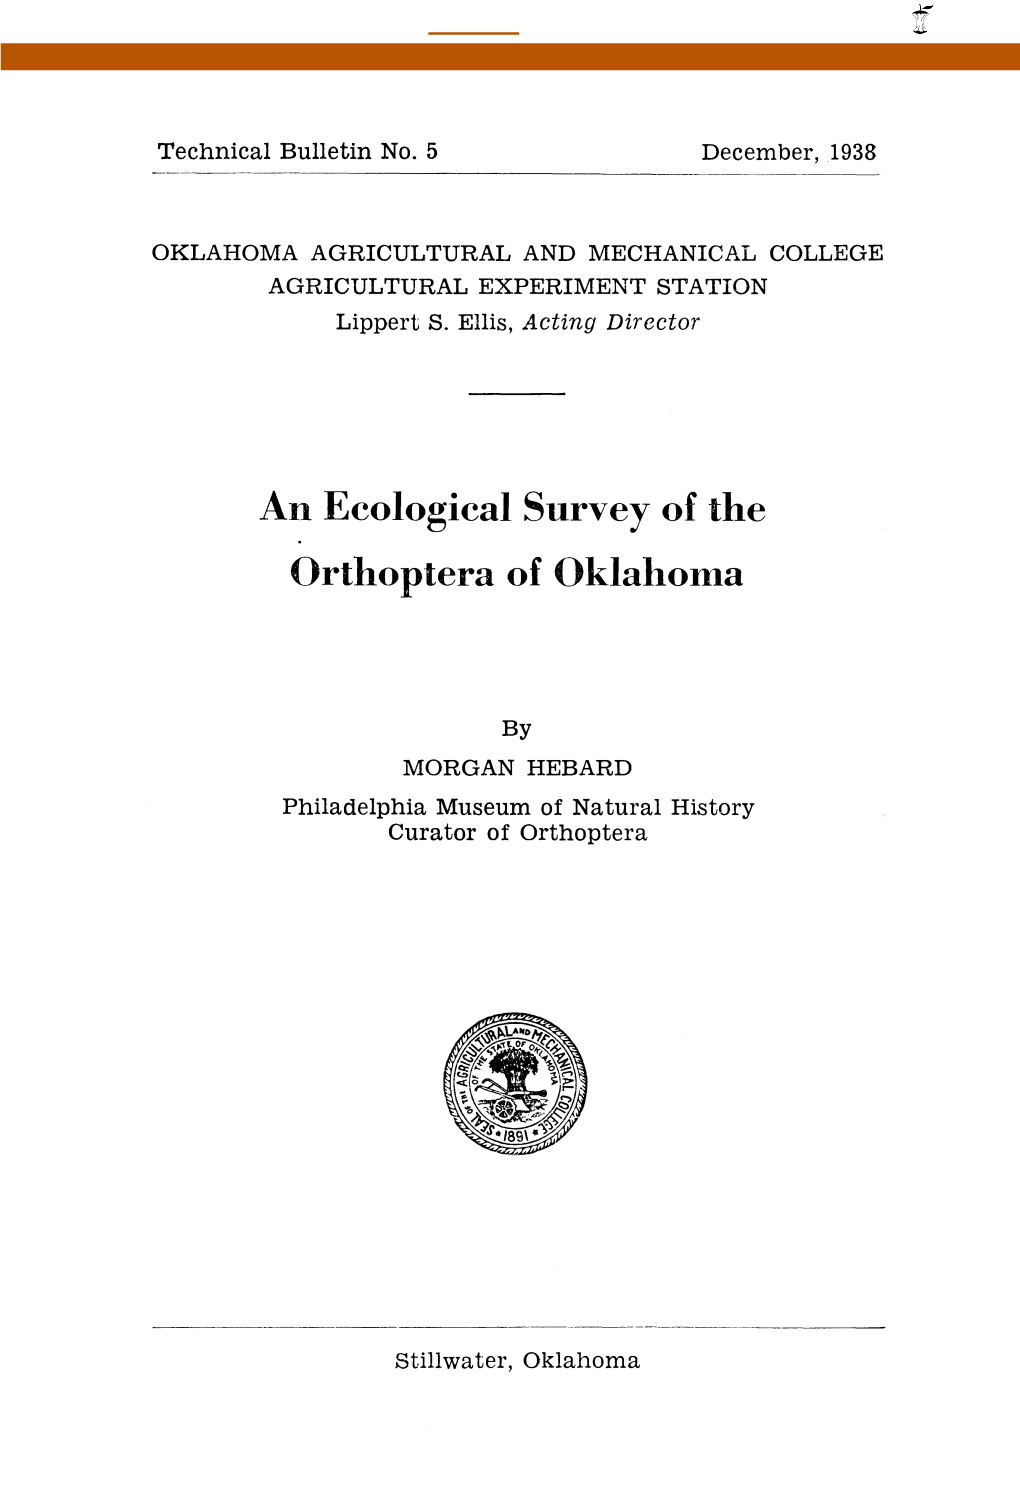 An Ecological Survey of the Orthoptera of Oklahoma